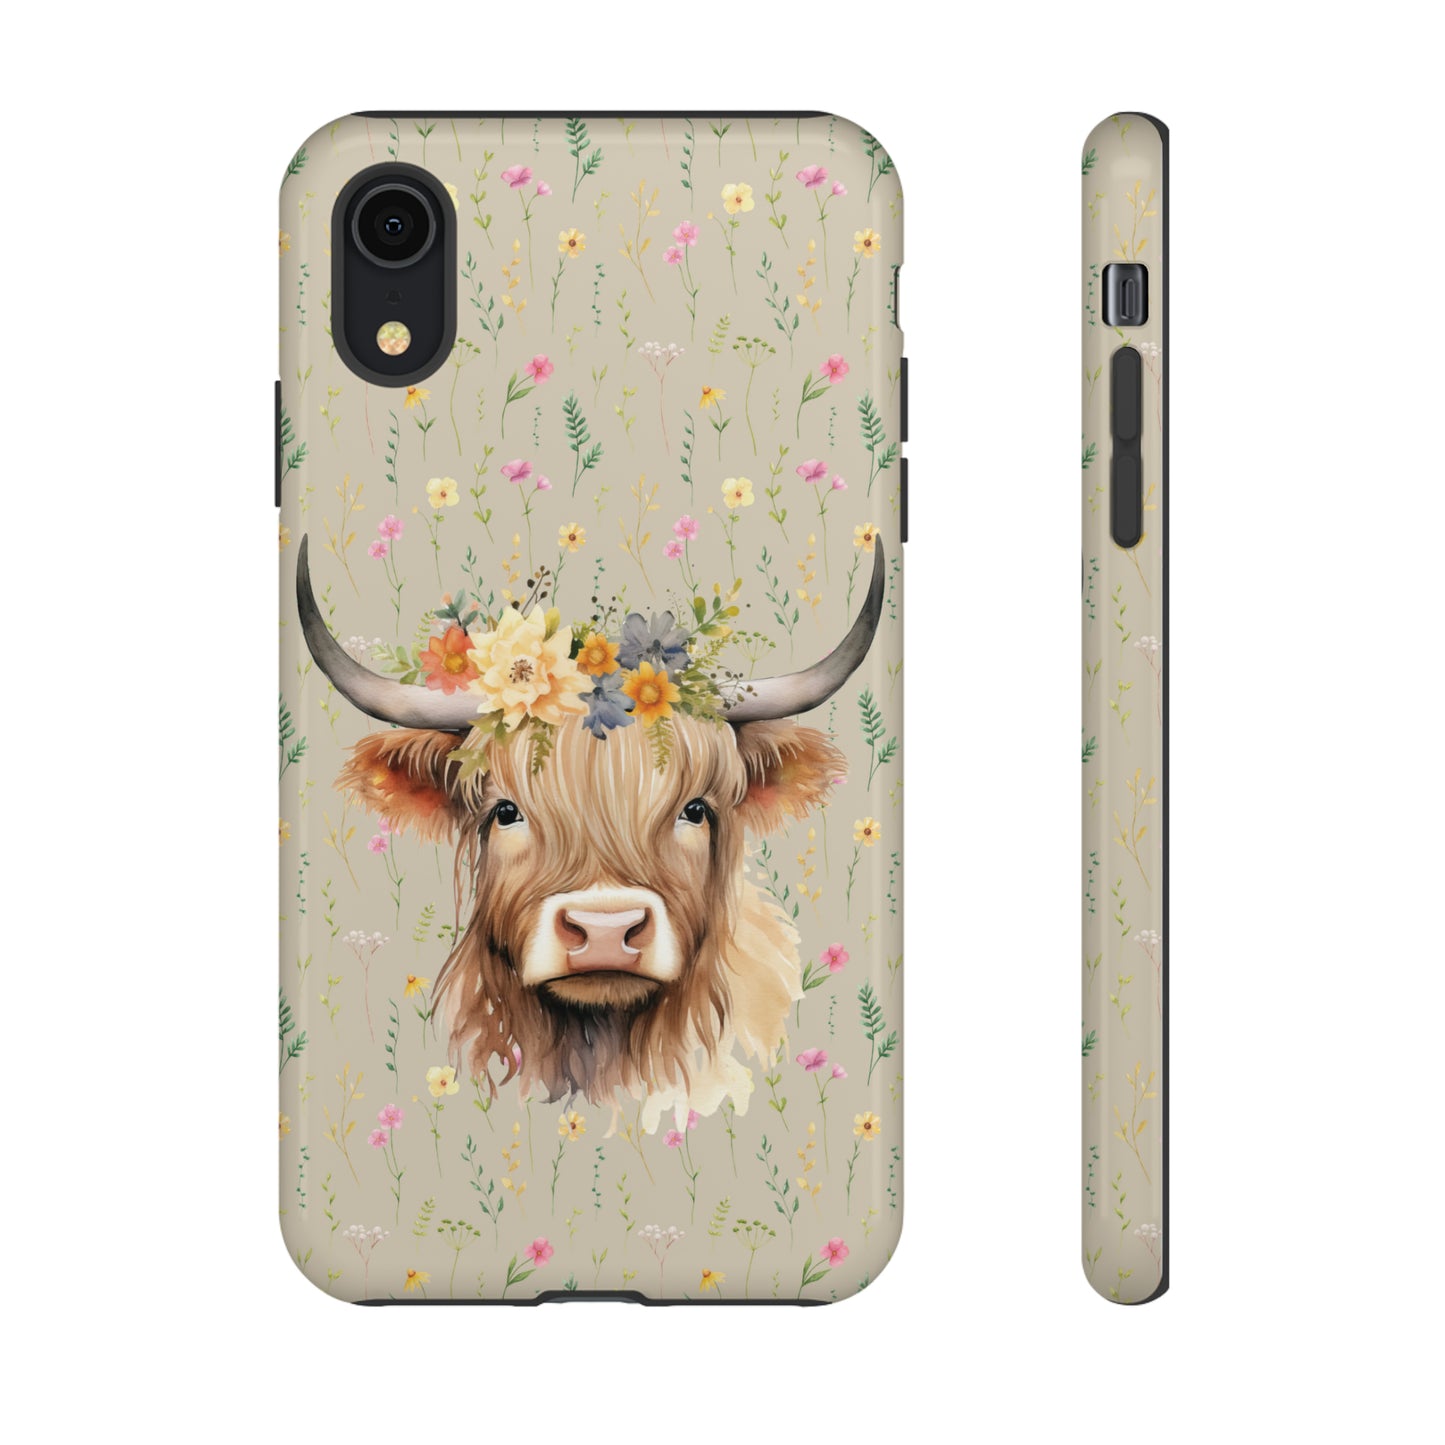 Highland Cow and Flowers - Unique Phone Case Design - Tough Cases - Cow Lover Gift - Cute Phone Case